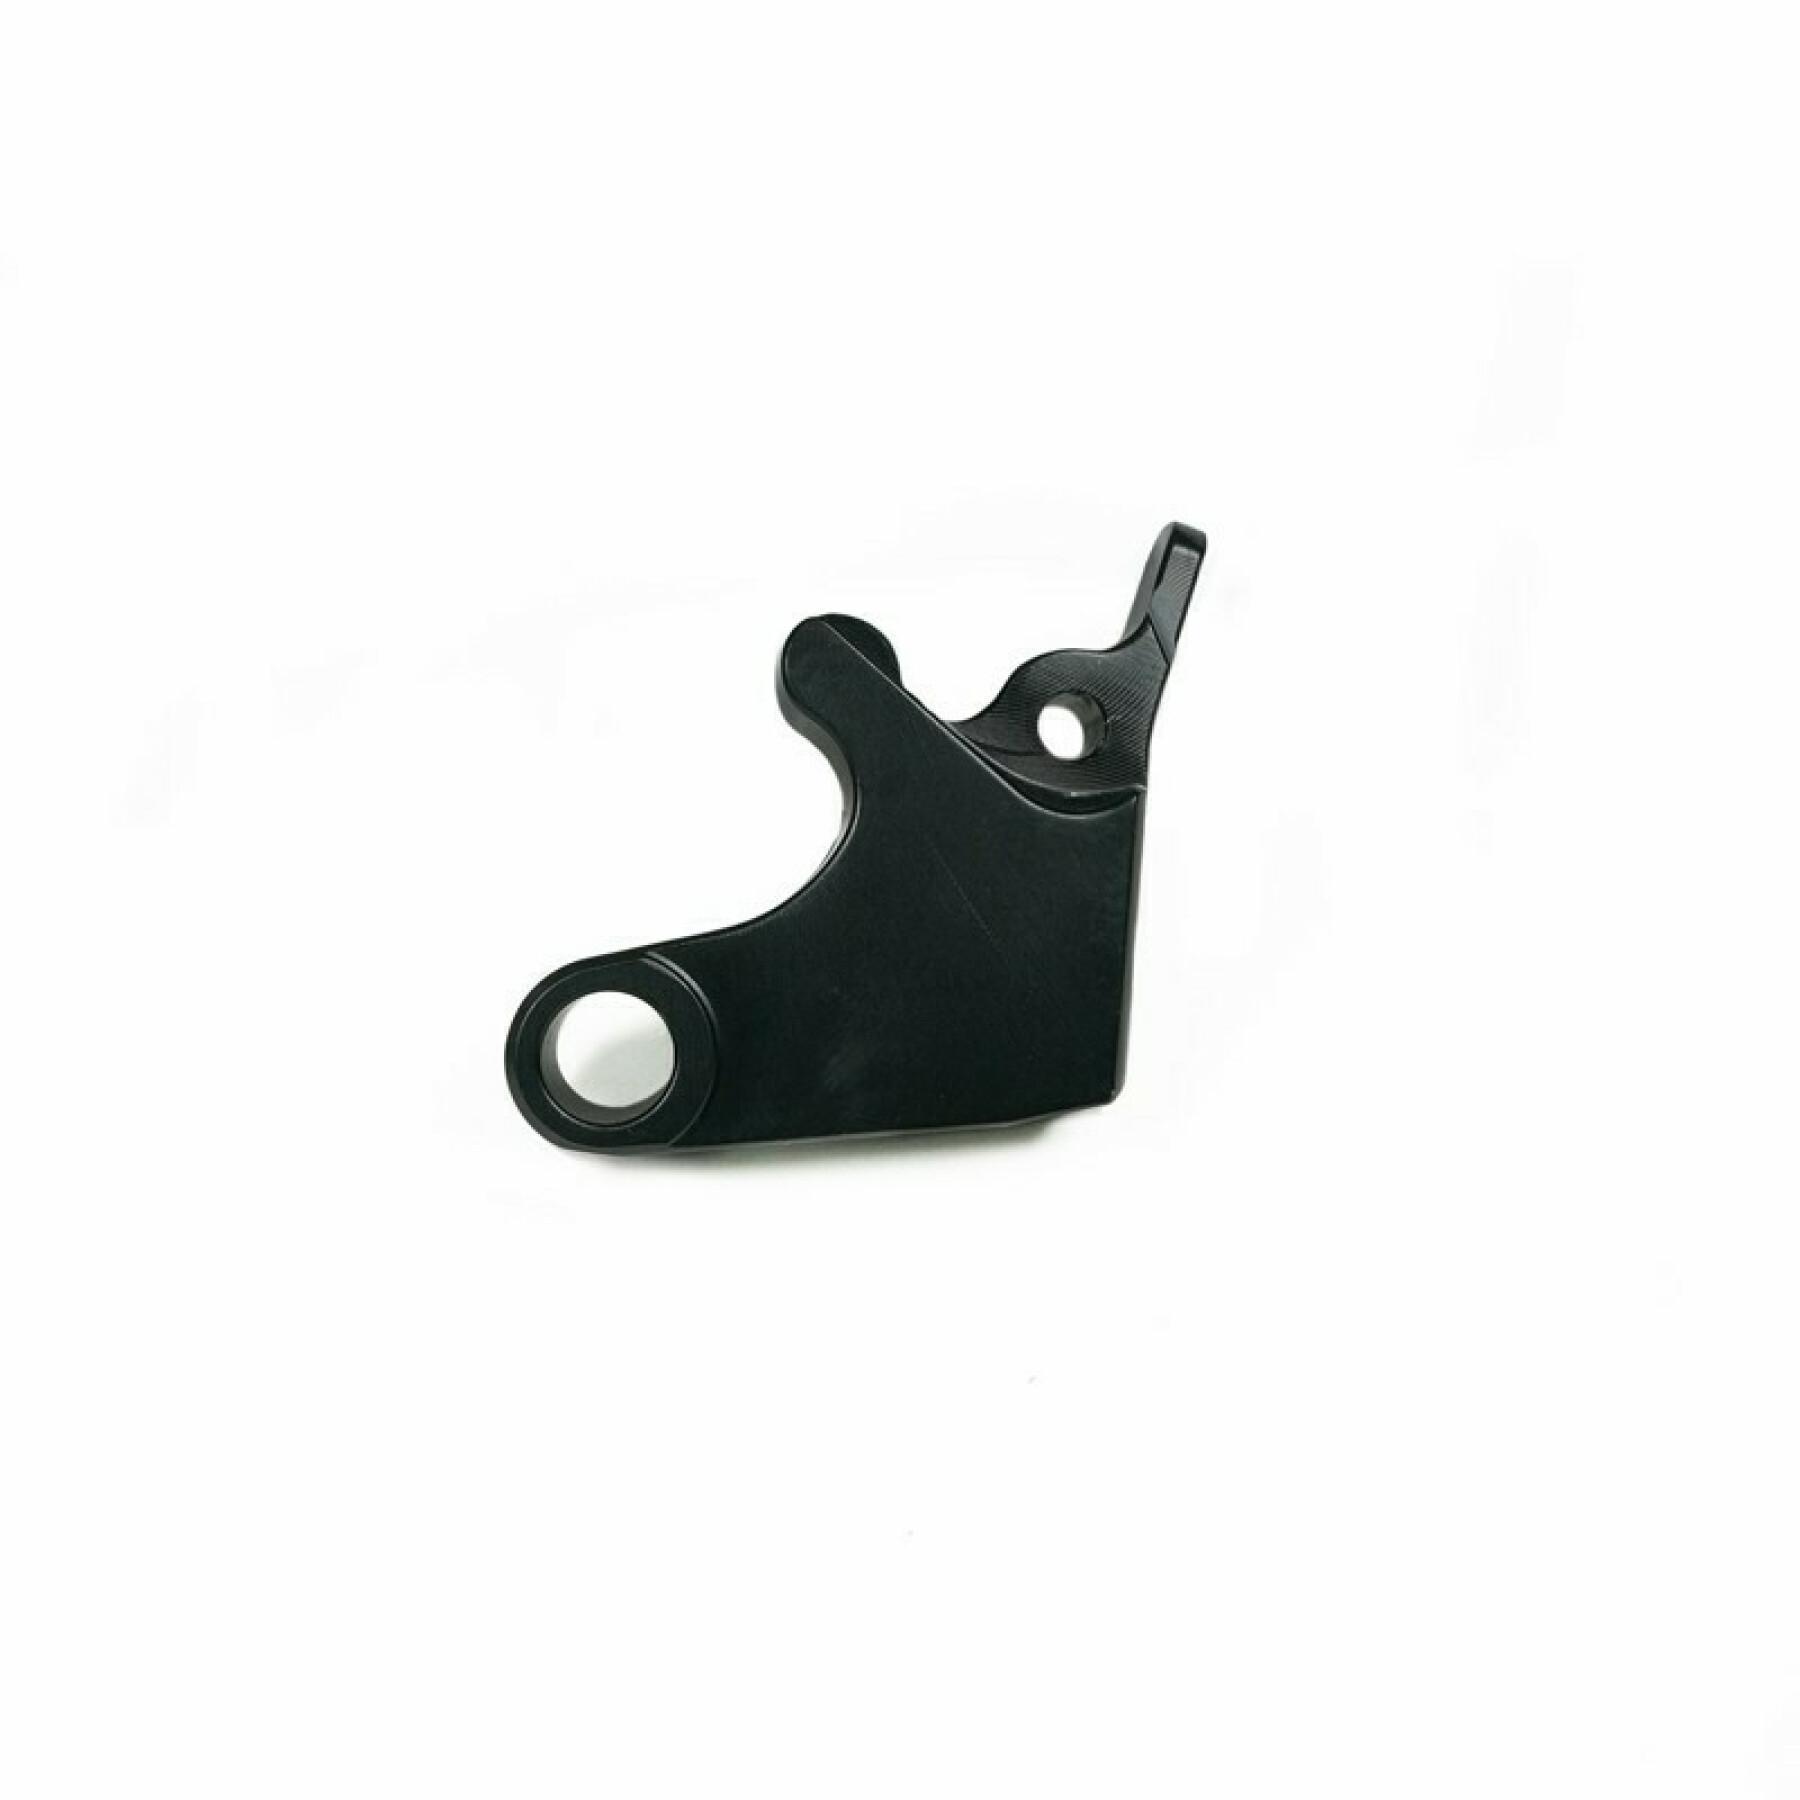 Clutch lever adapter 29 Chaft